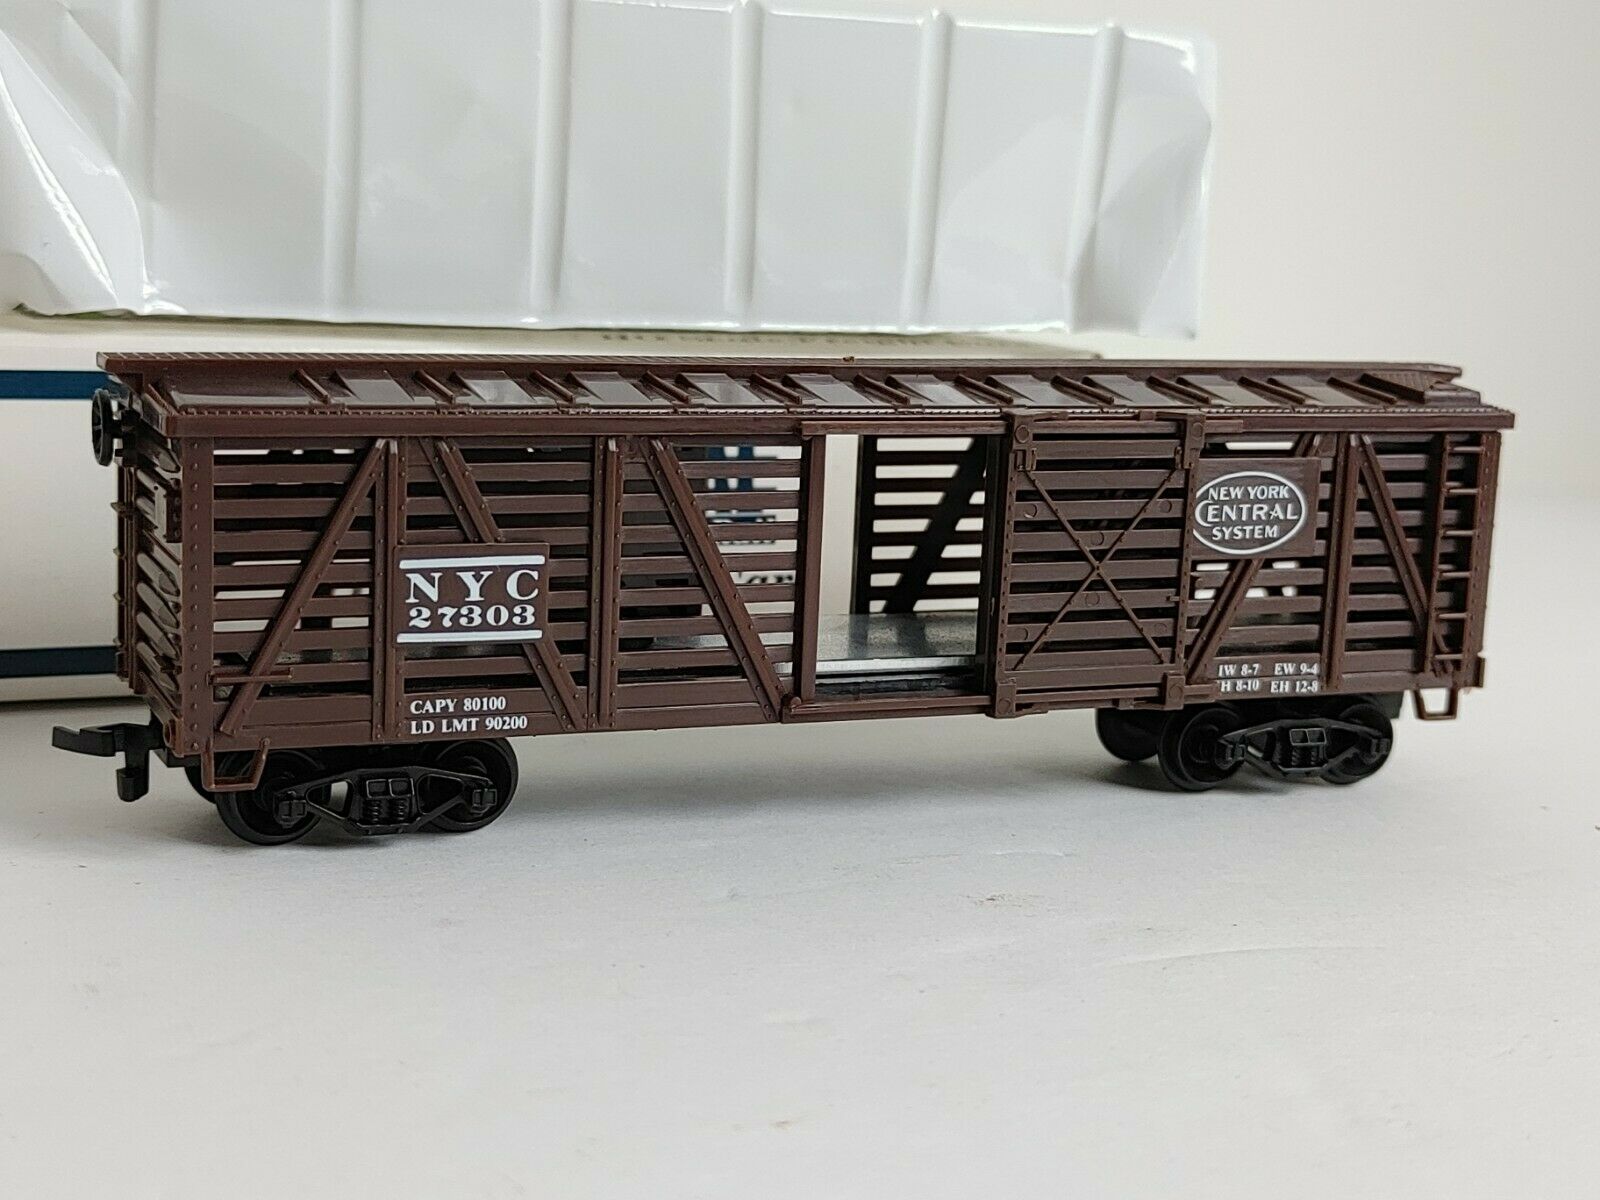 HO Scale - Life-Like - 8461 - Stock Car, 40 Foot, Wood - New York Central - 27303